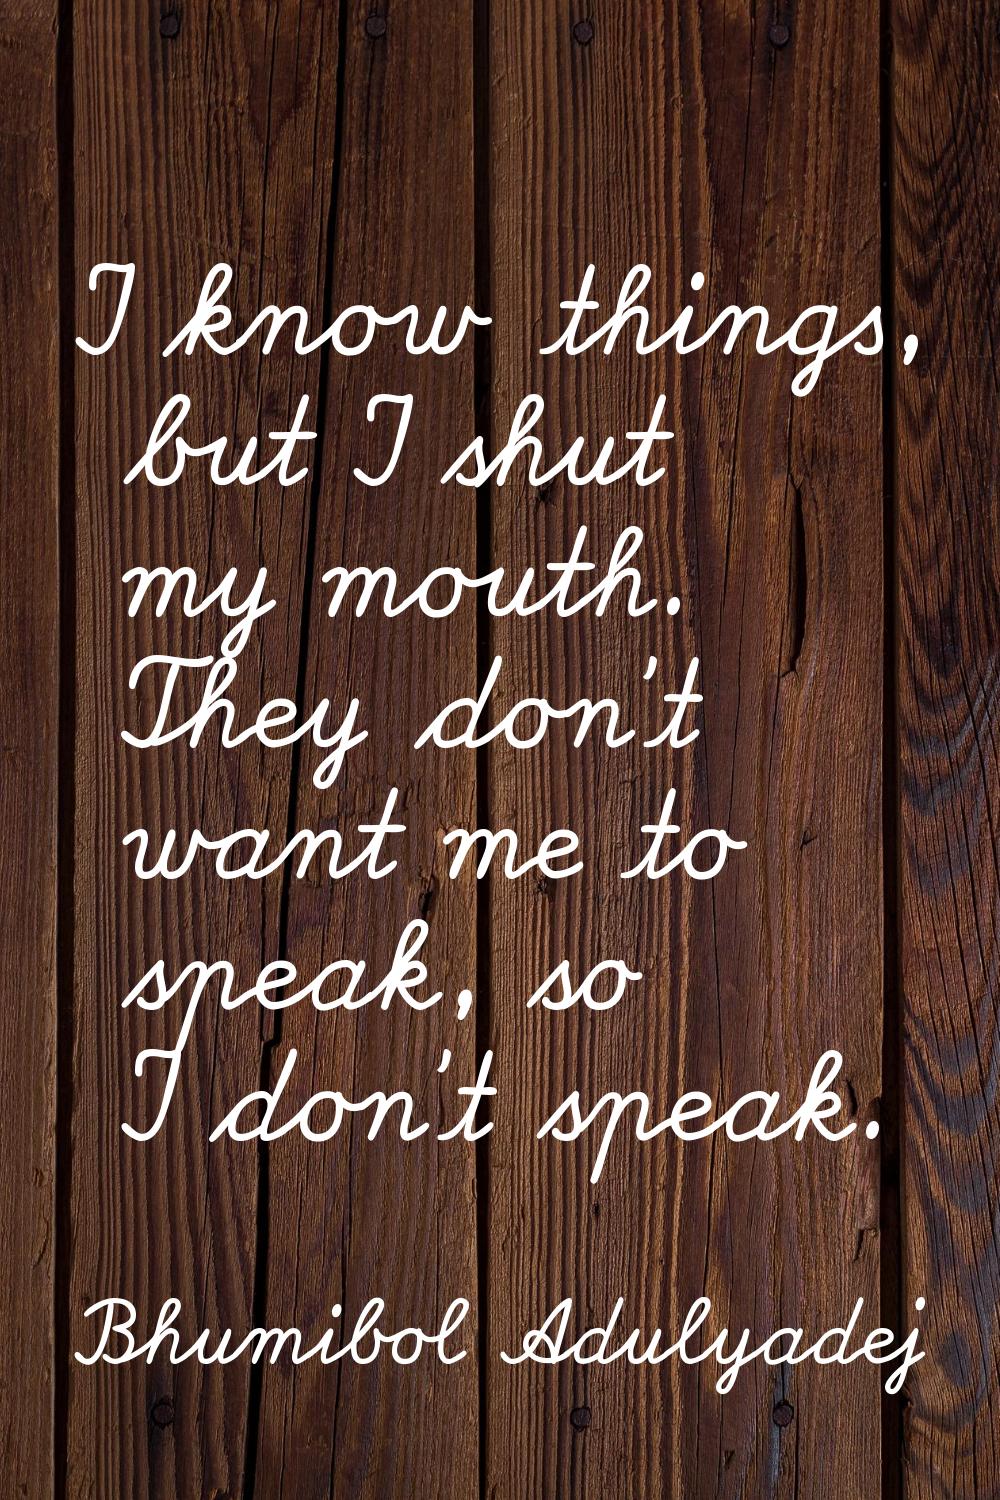 I know things, but I shut my mouth. They don't want me to speak, so I don't speak.